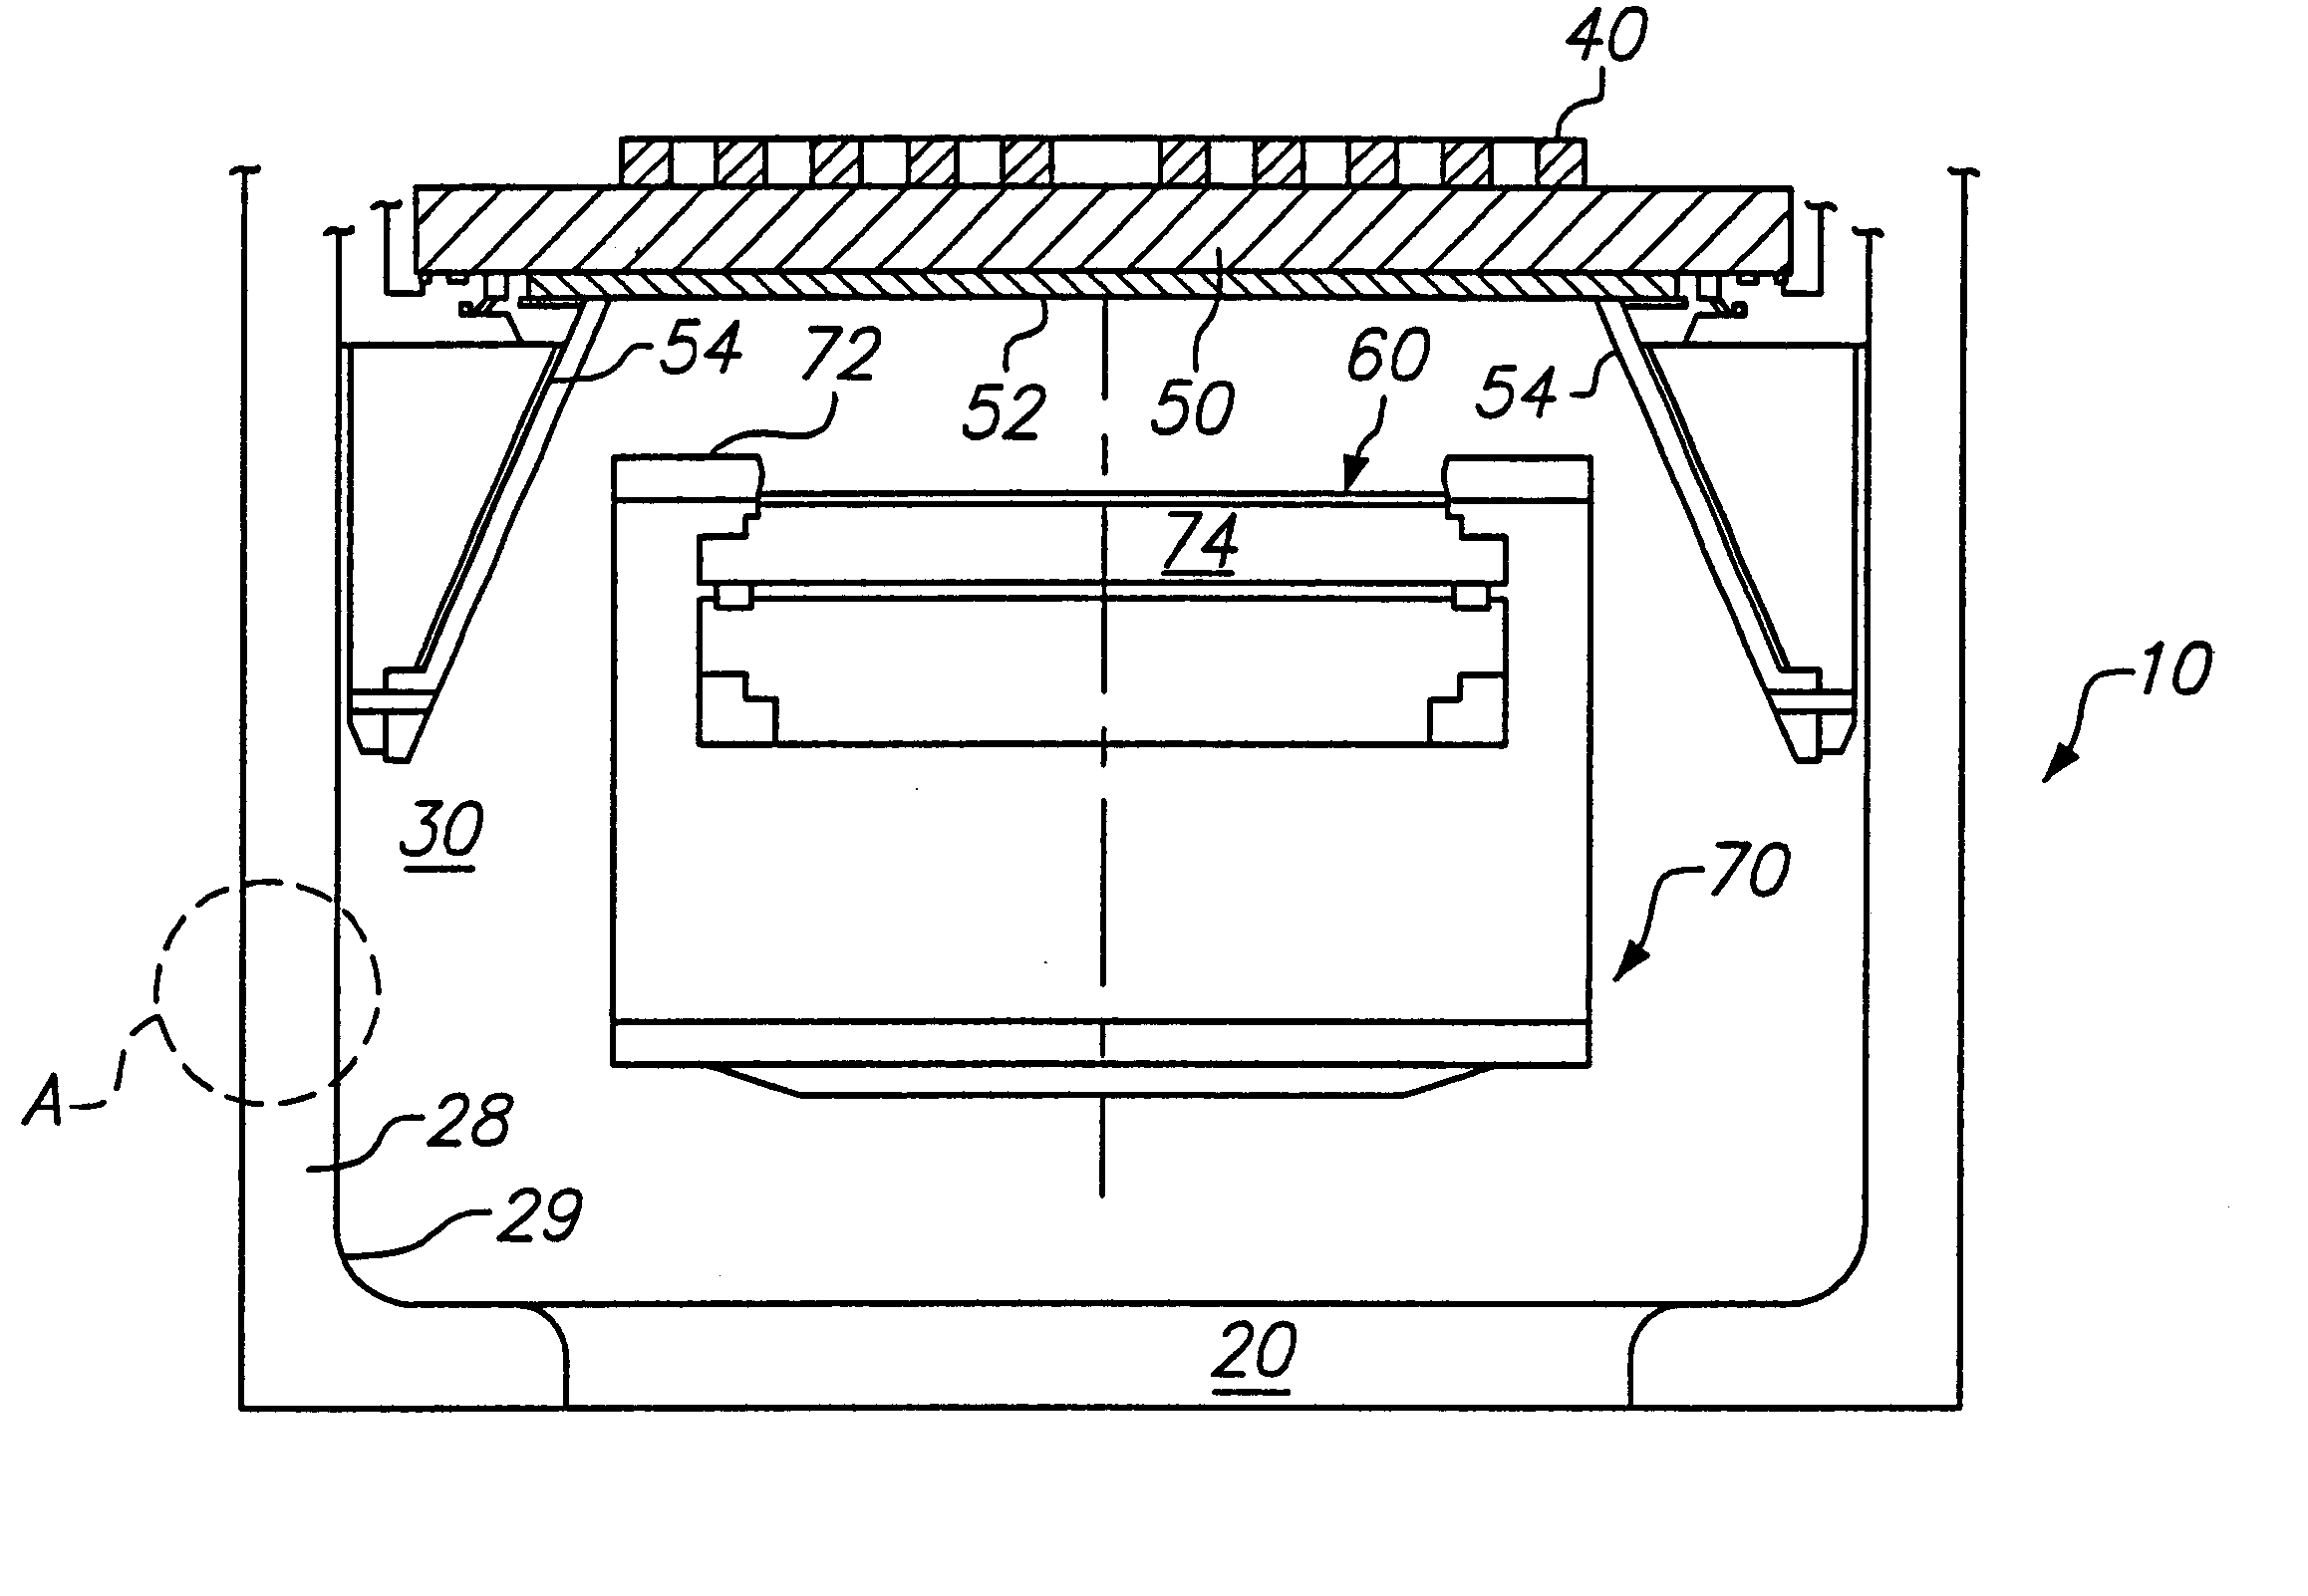 Diamond coatings on reactor wall and method of manufacturing thereof